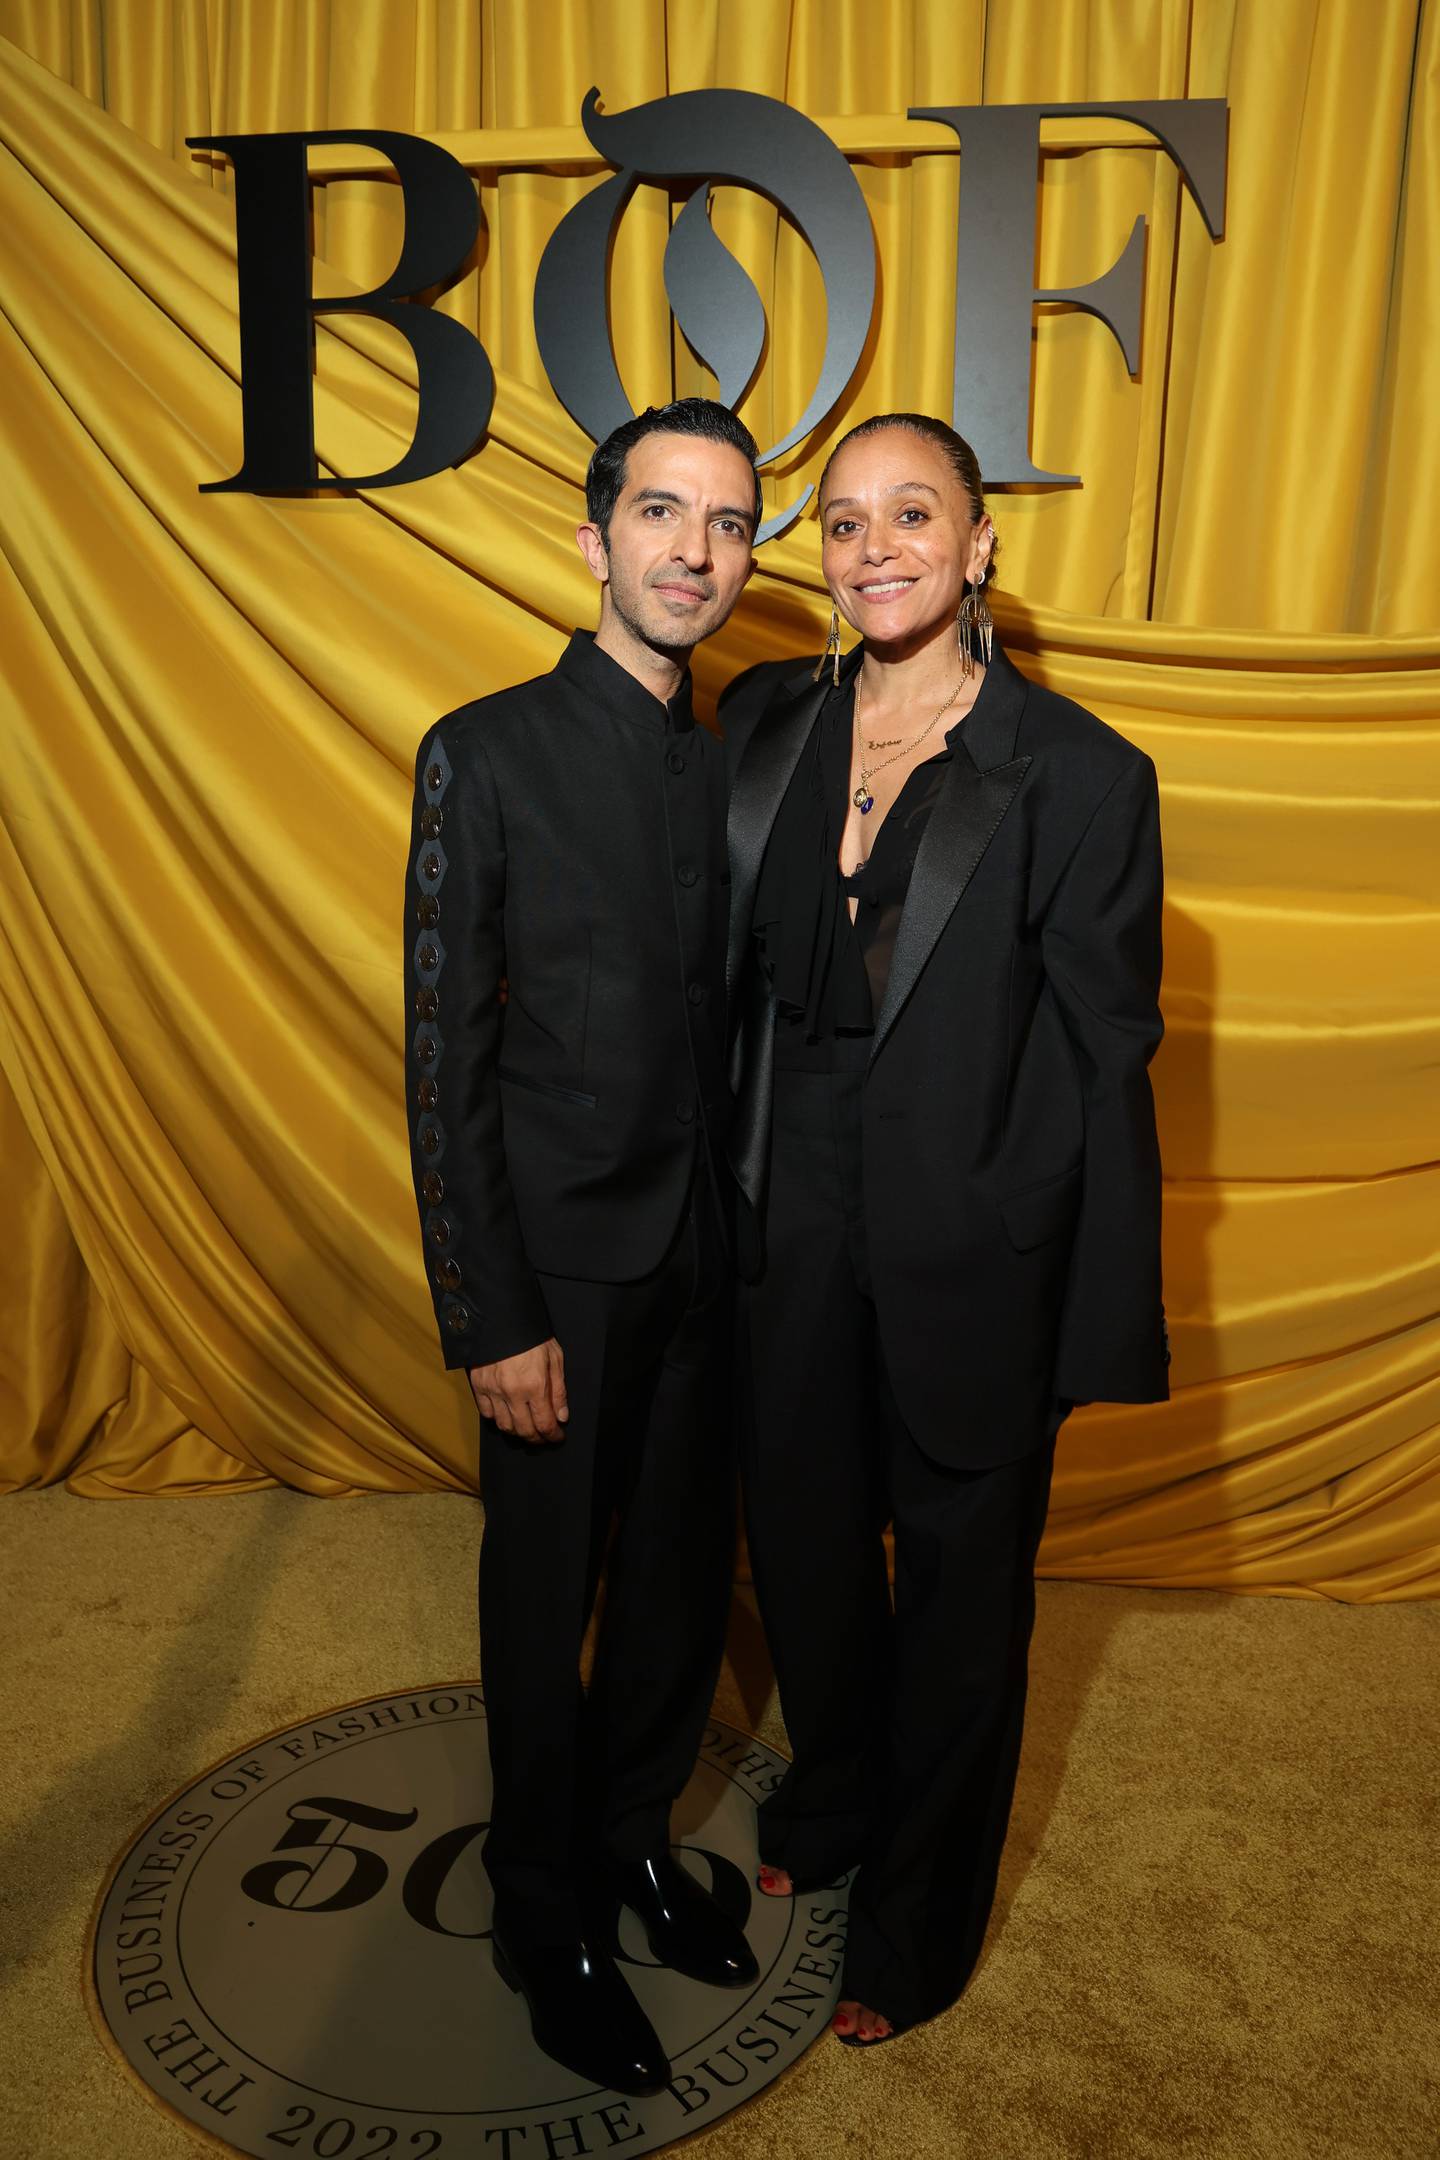 Imran Amed, founder & chief executive, from Canada, and Samira Nasr, editor-in-chief, from Canada and United States attend the #BoF500 gala during Paris Fashion Week.